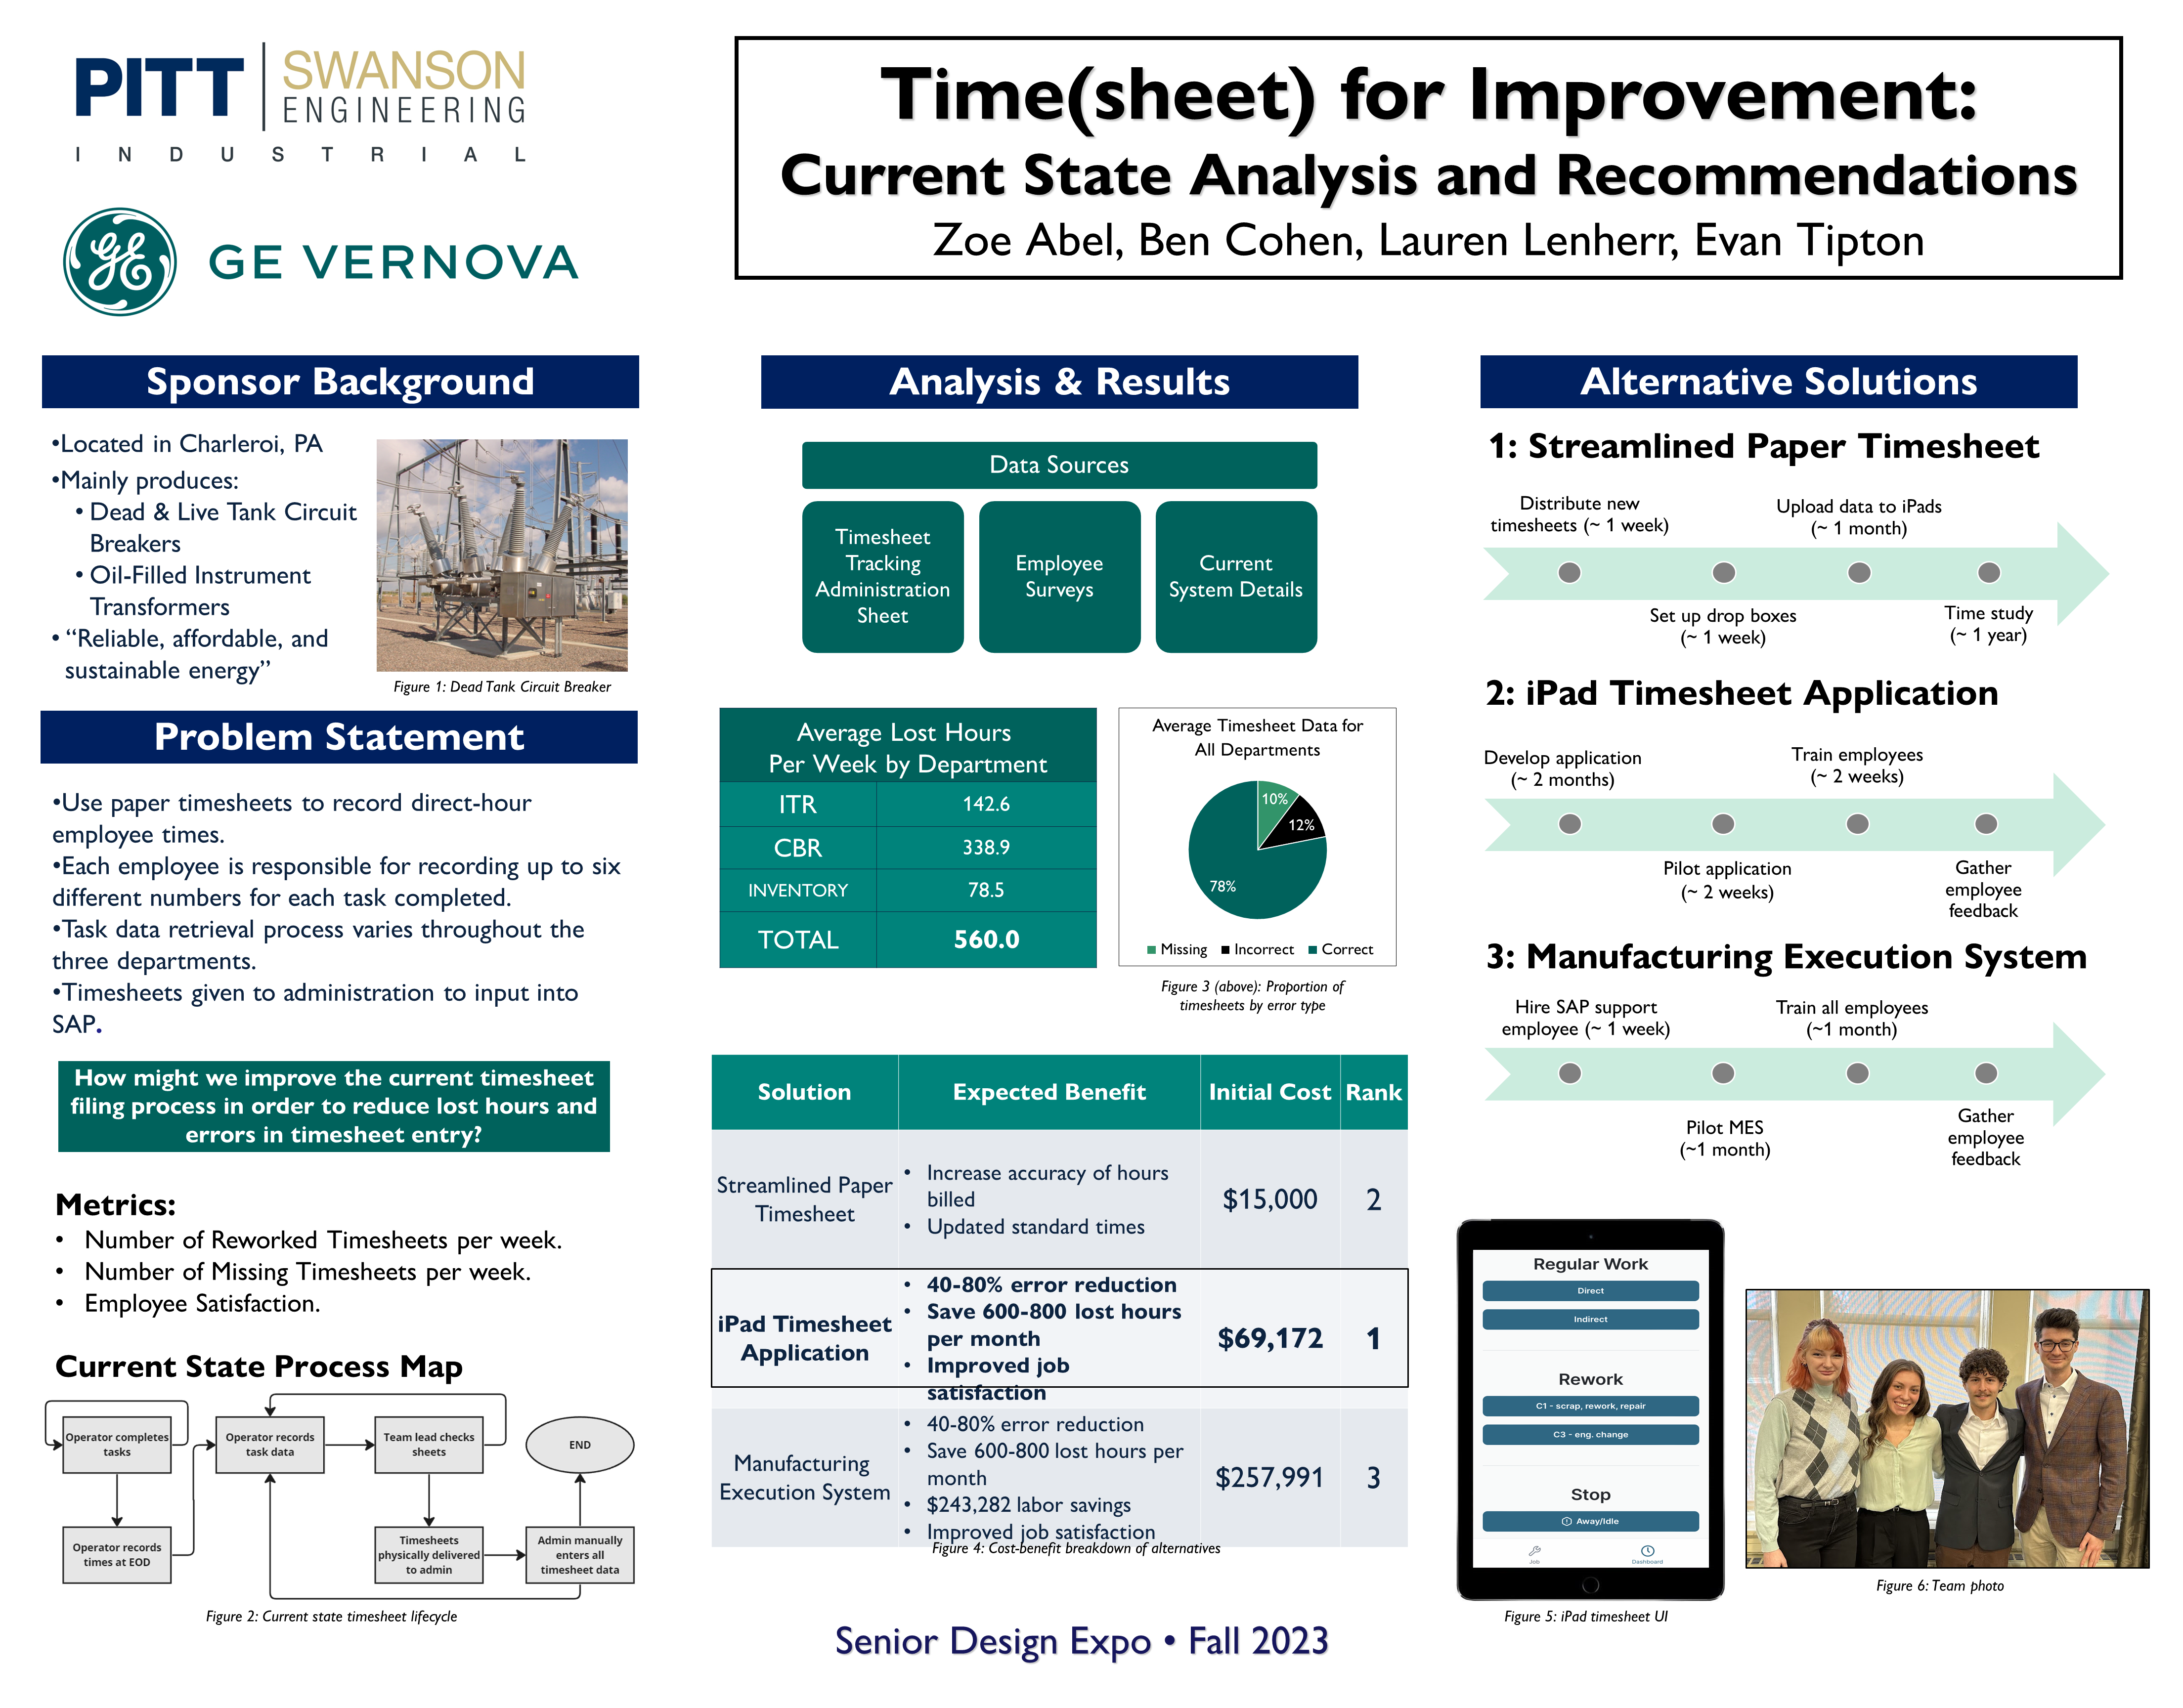 Time(sheet) for Improvement: Current State Analysis and Recommendations research project poster with visuals of project summary